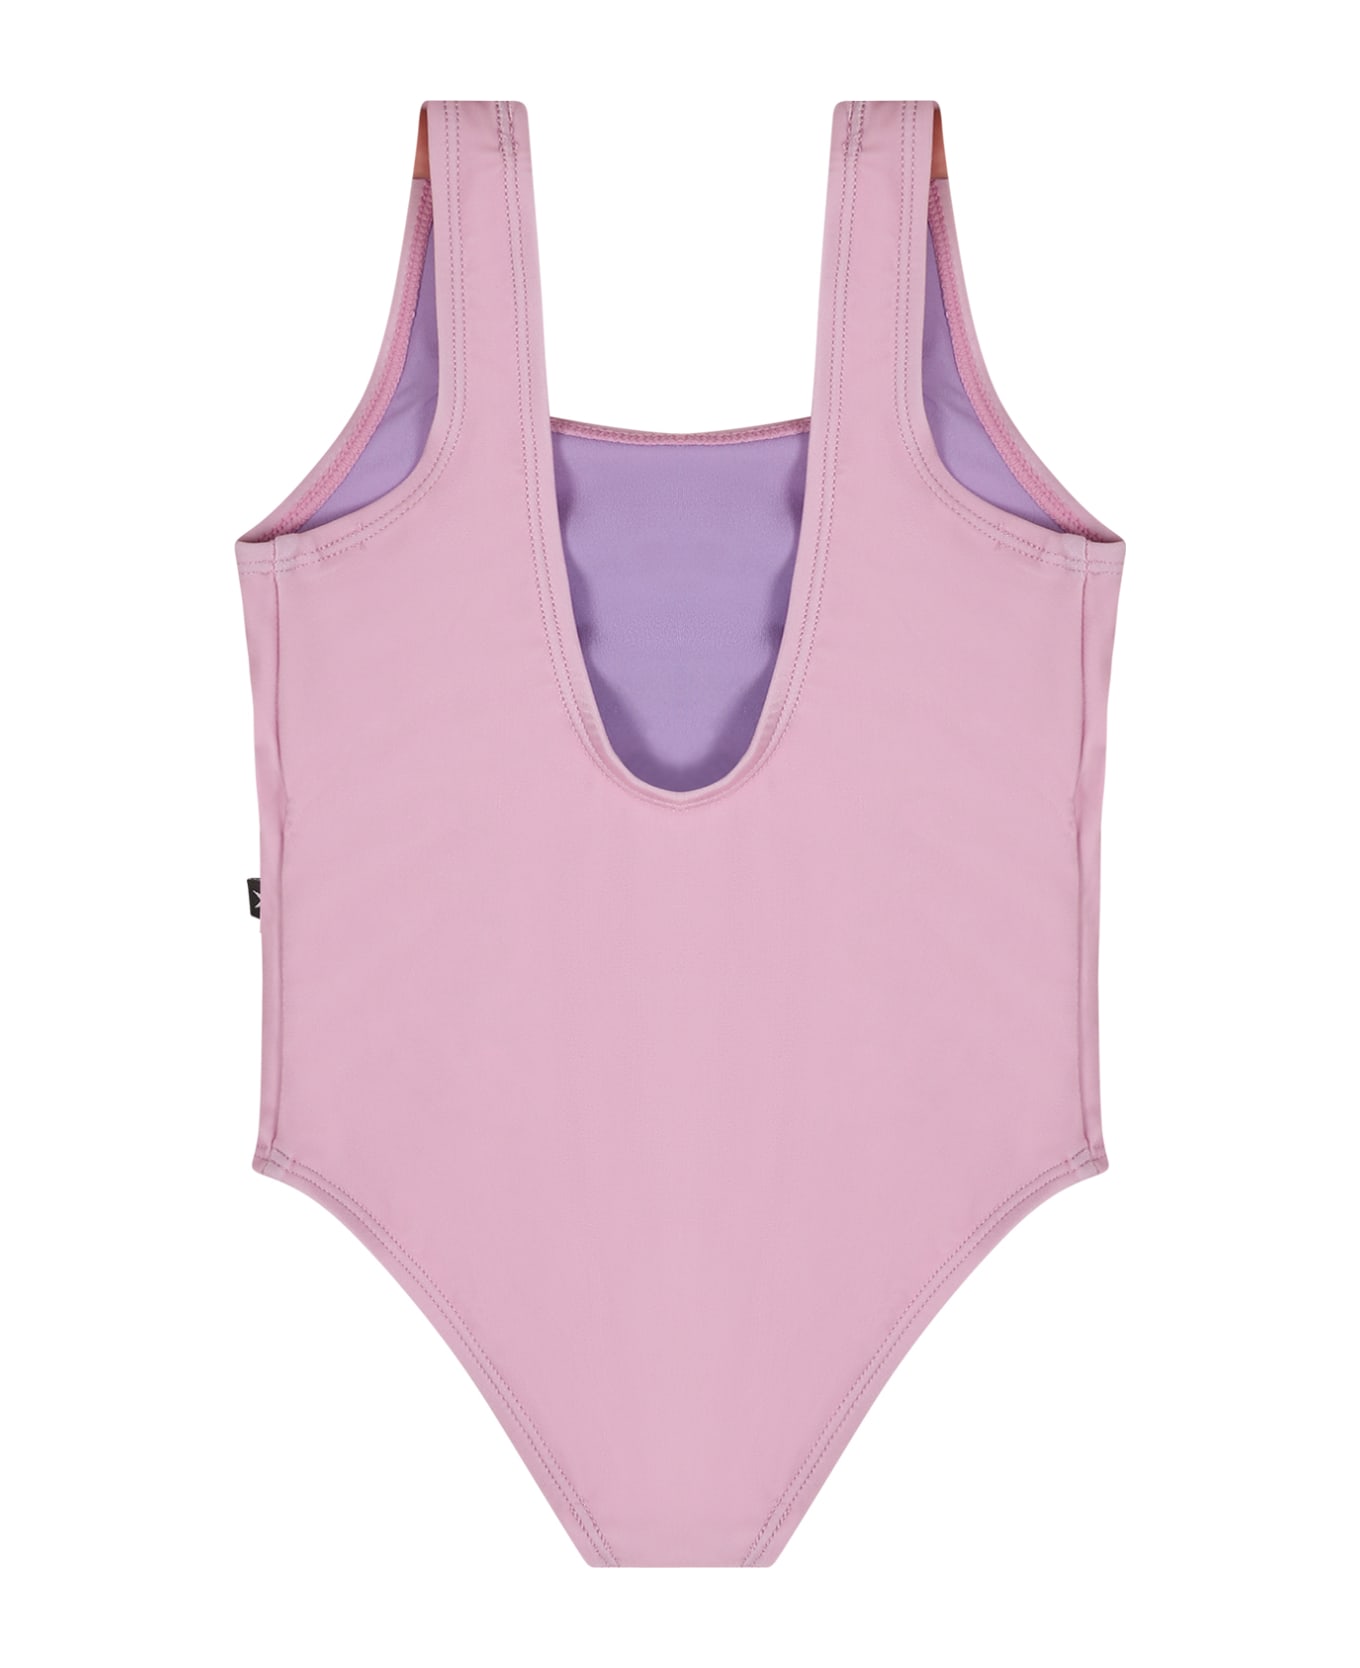 Molo Pink Swimsuit For Baby Girl With Smiley - Pink